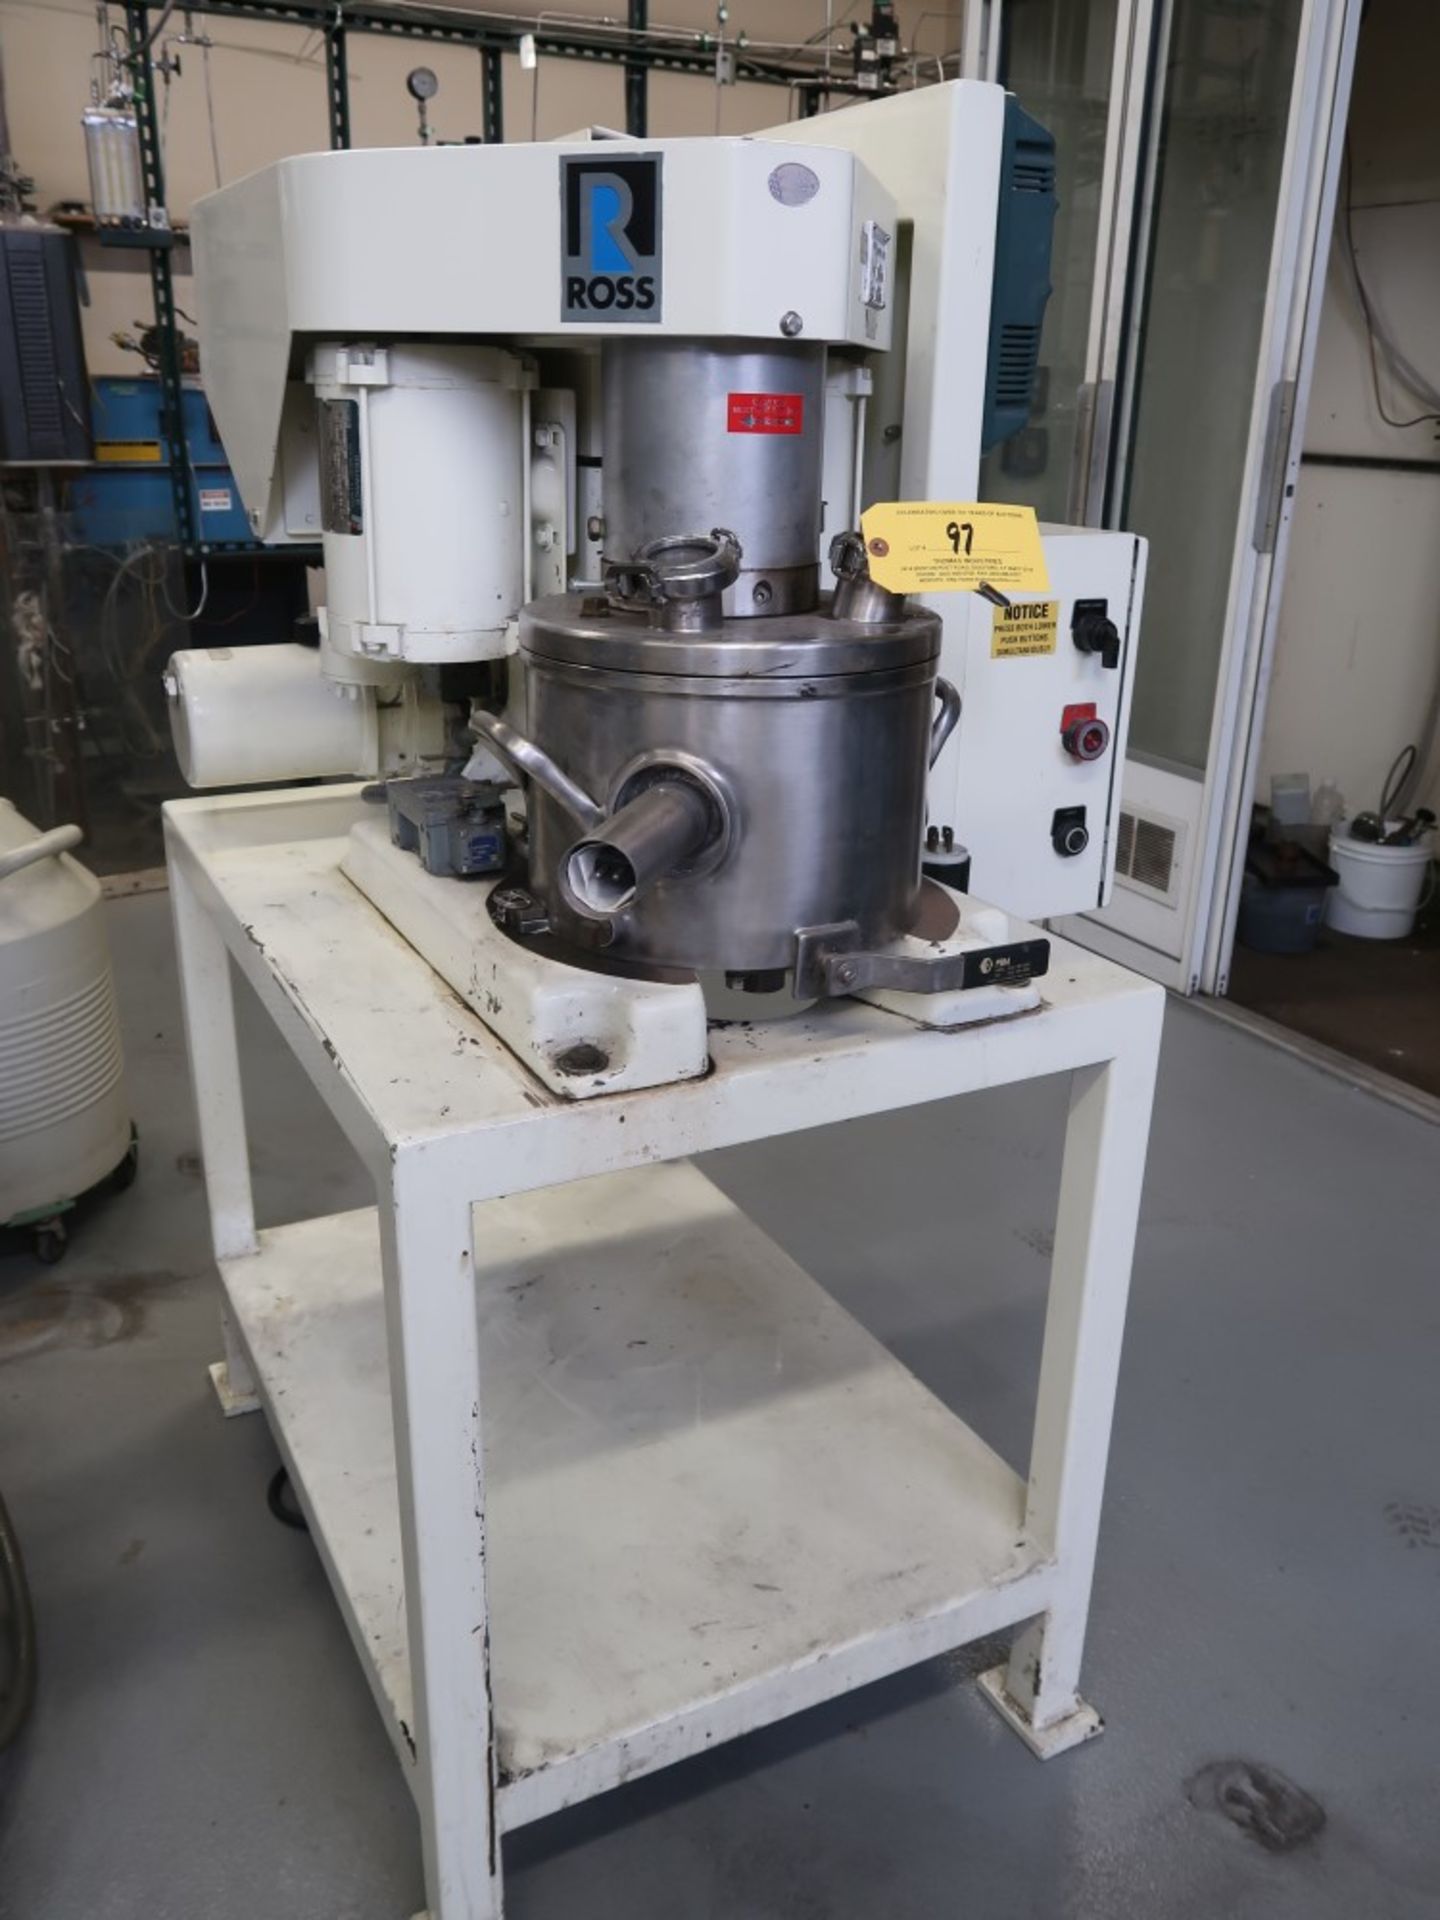 Ross 2-Gallon Planetary Mixer Model PVM-2 S/N 72402, Vacuum and Jacketed - Image 3 of 6